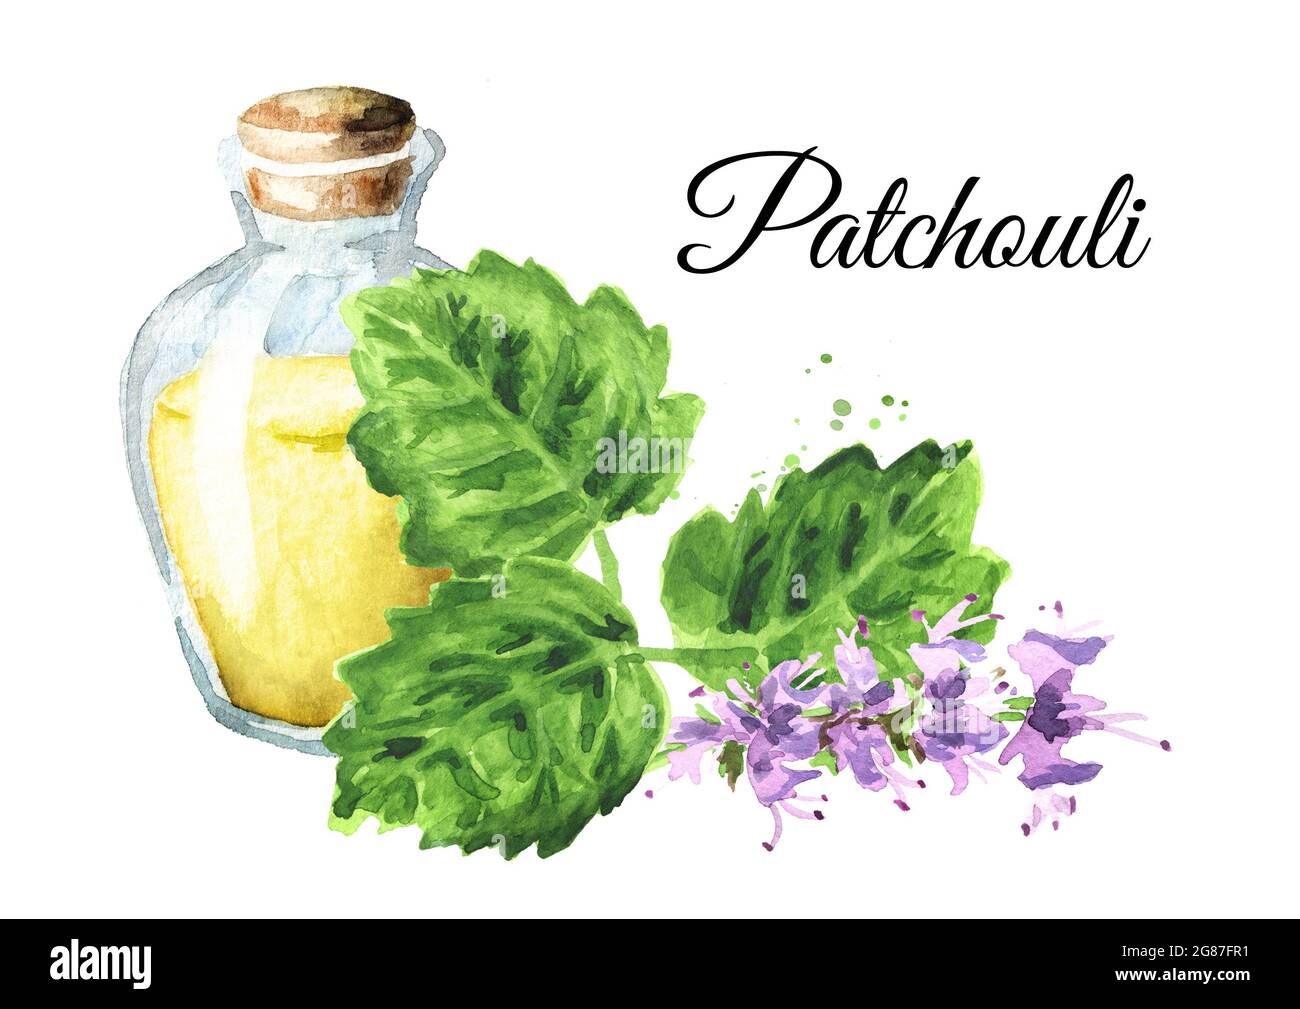 Patchouli or Pogostemon cablini essential oil. Hand drawn watercolor illustration isolated on white background Stock Photo